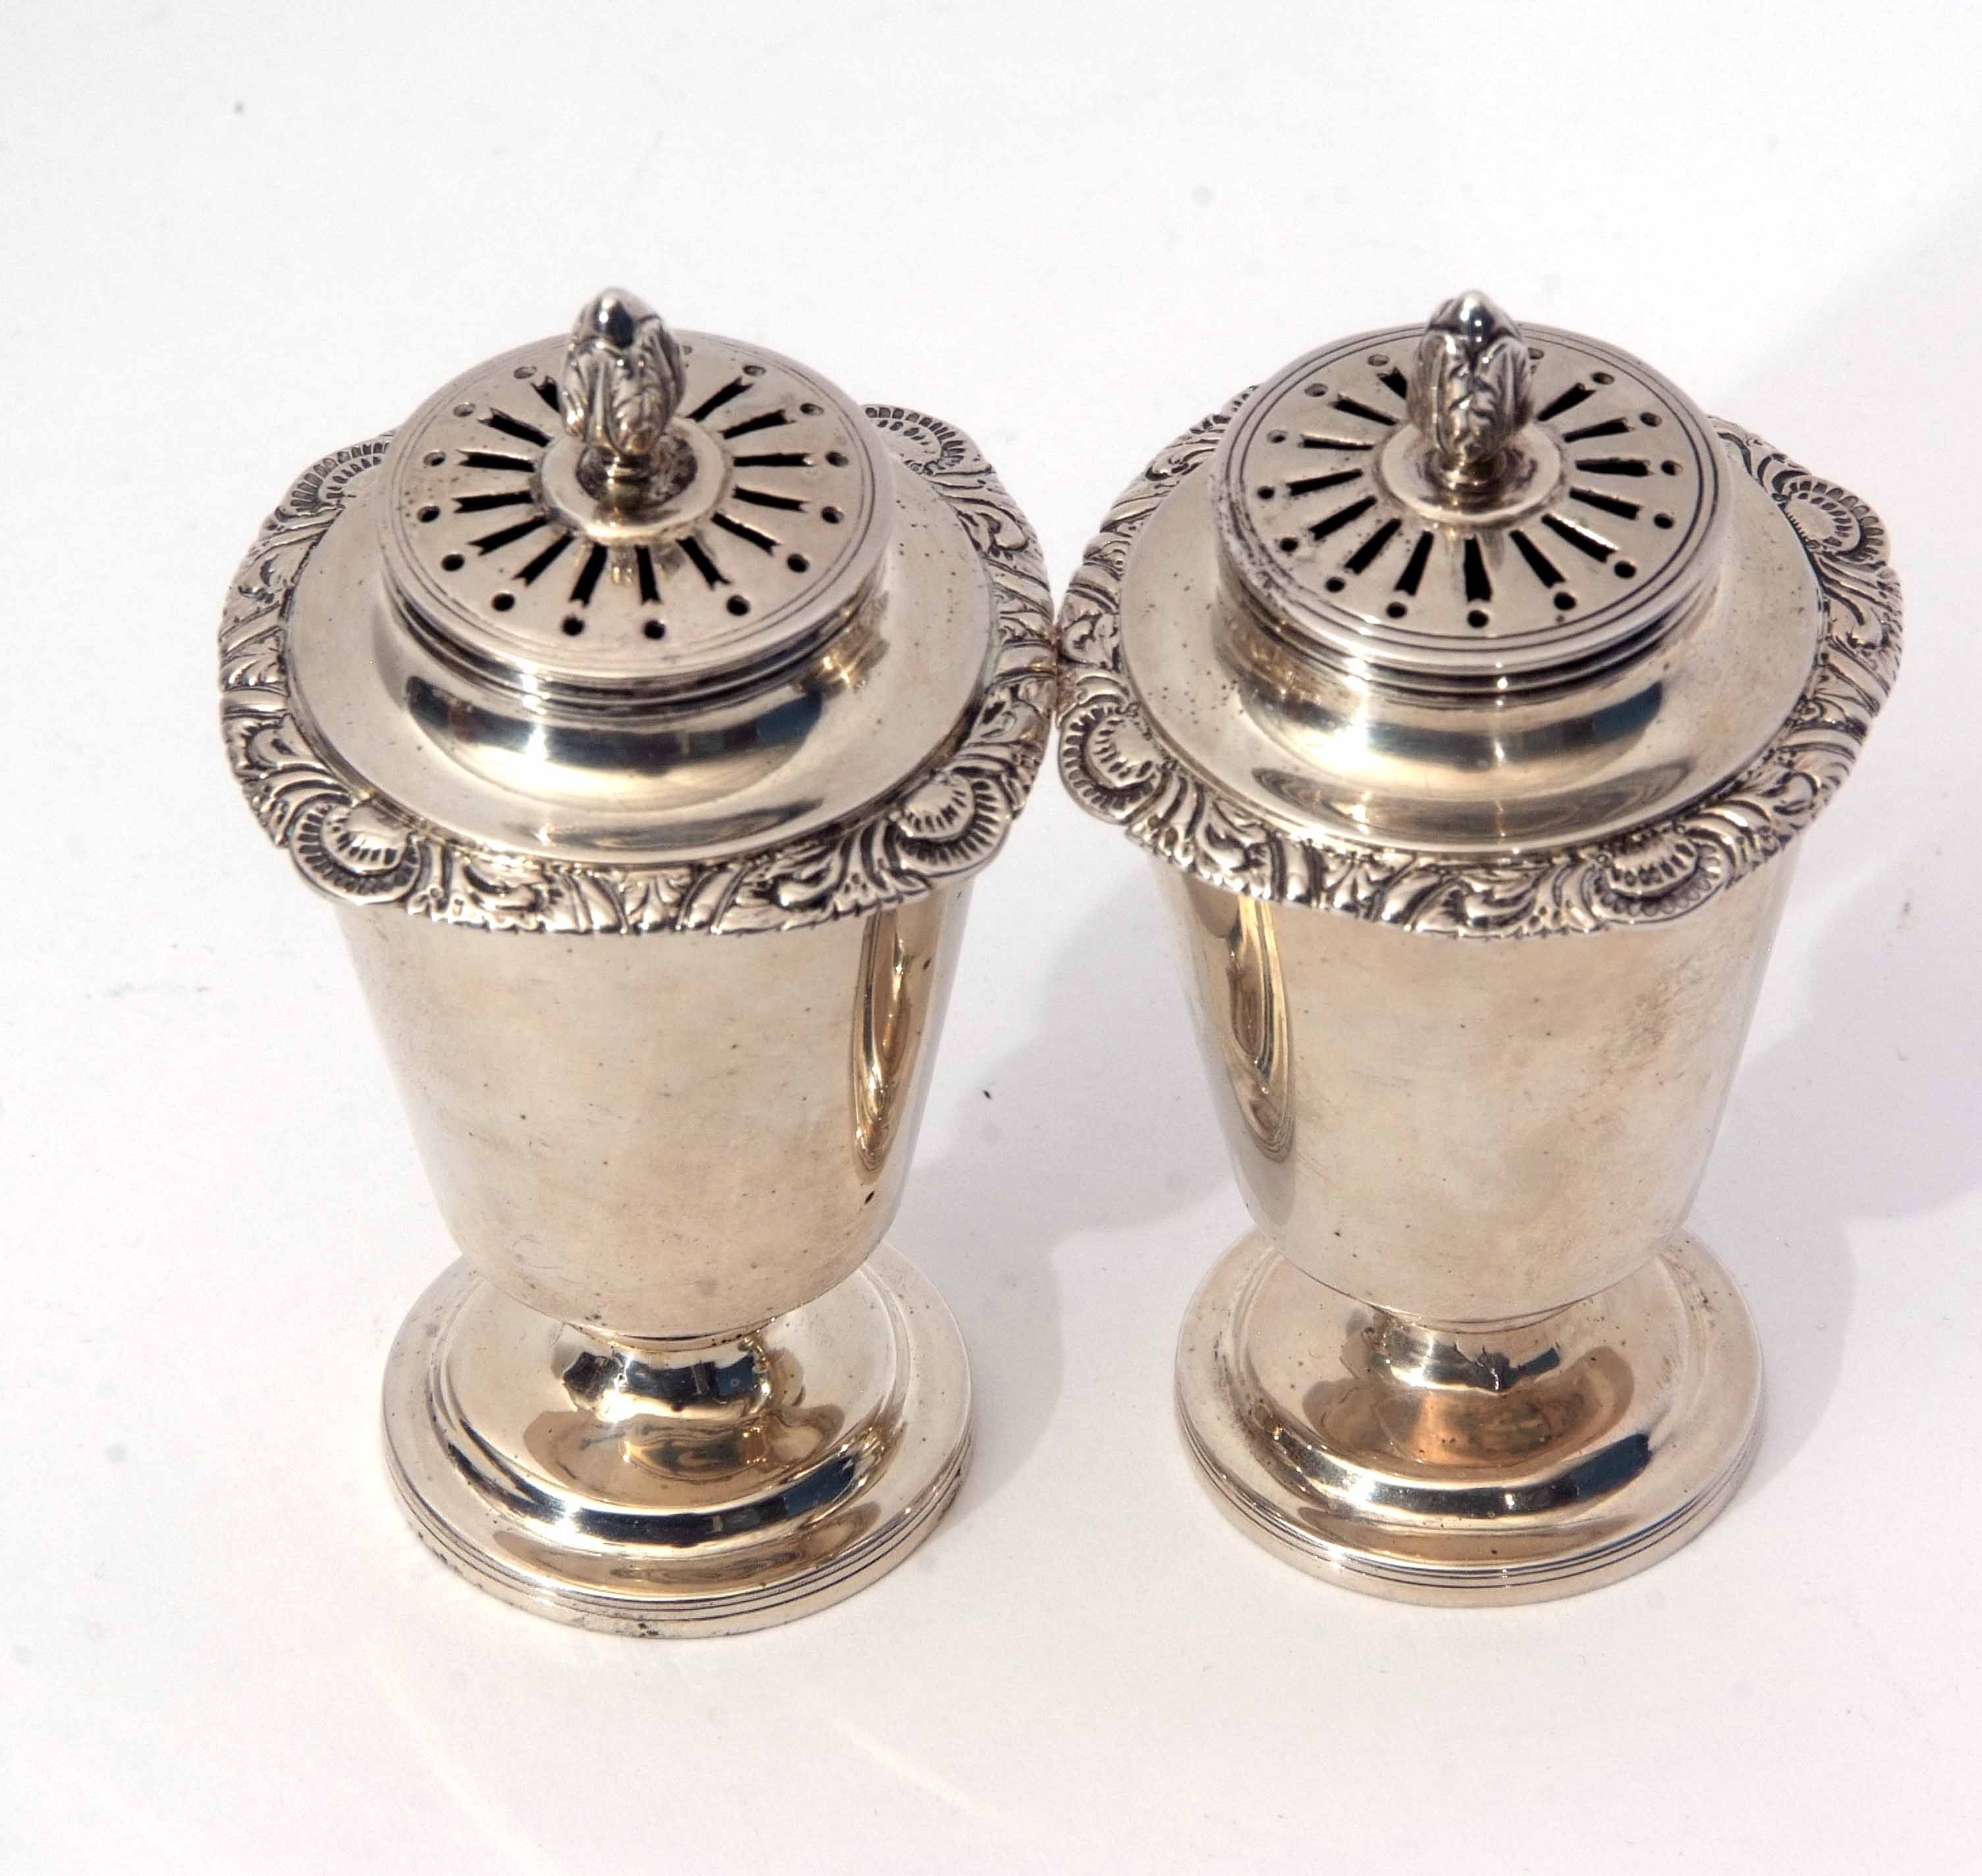 Two Indian colonial silver casters, each with pierced pull off covers and cast and applied finials - Image 4 of 4